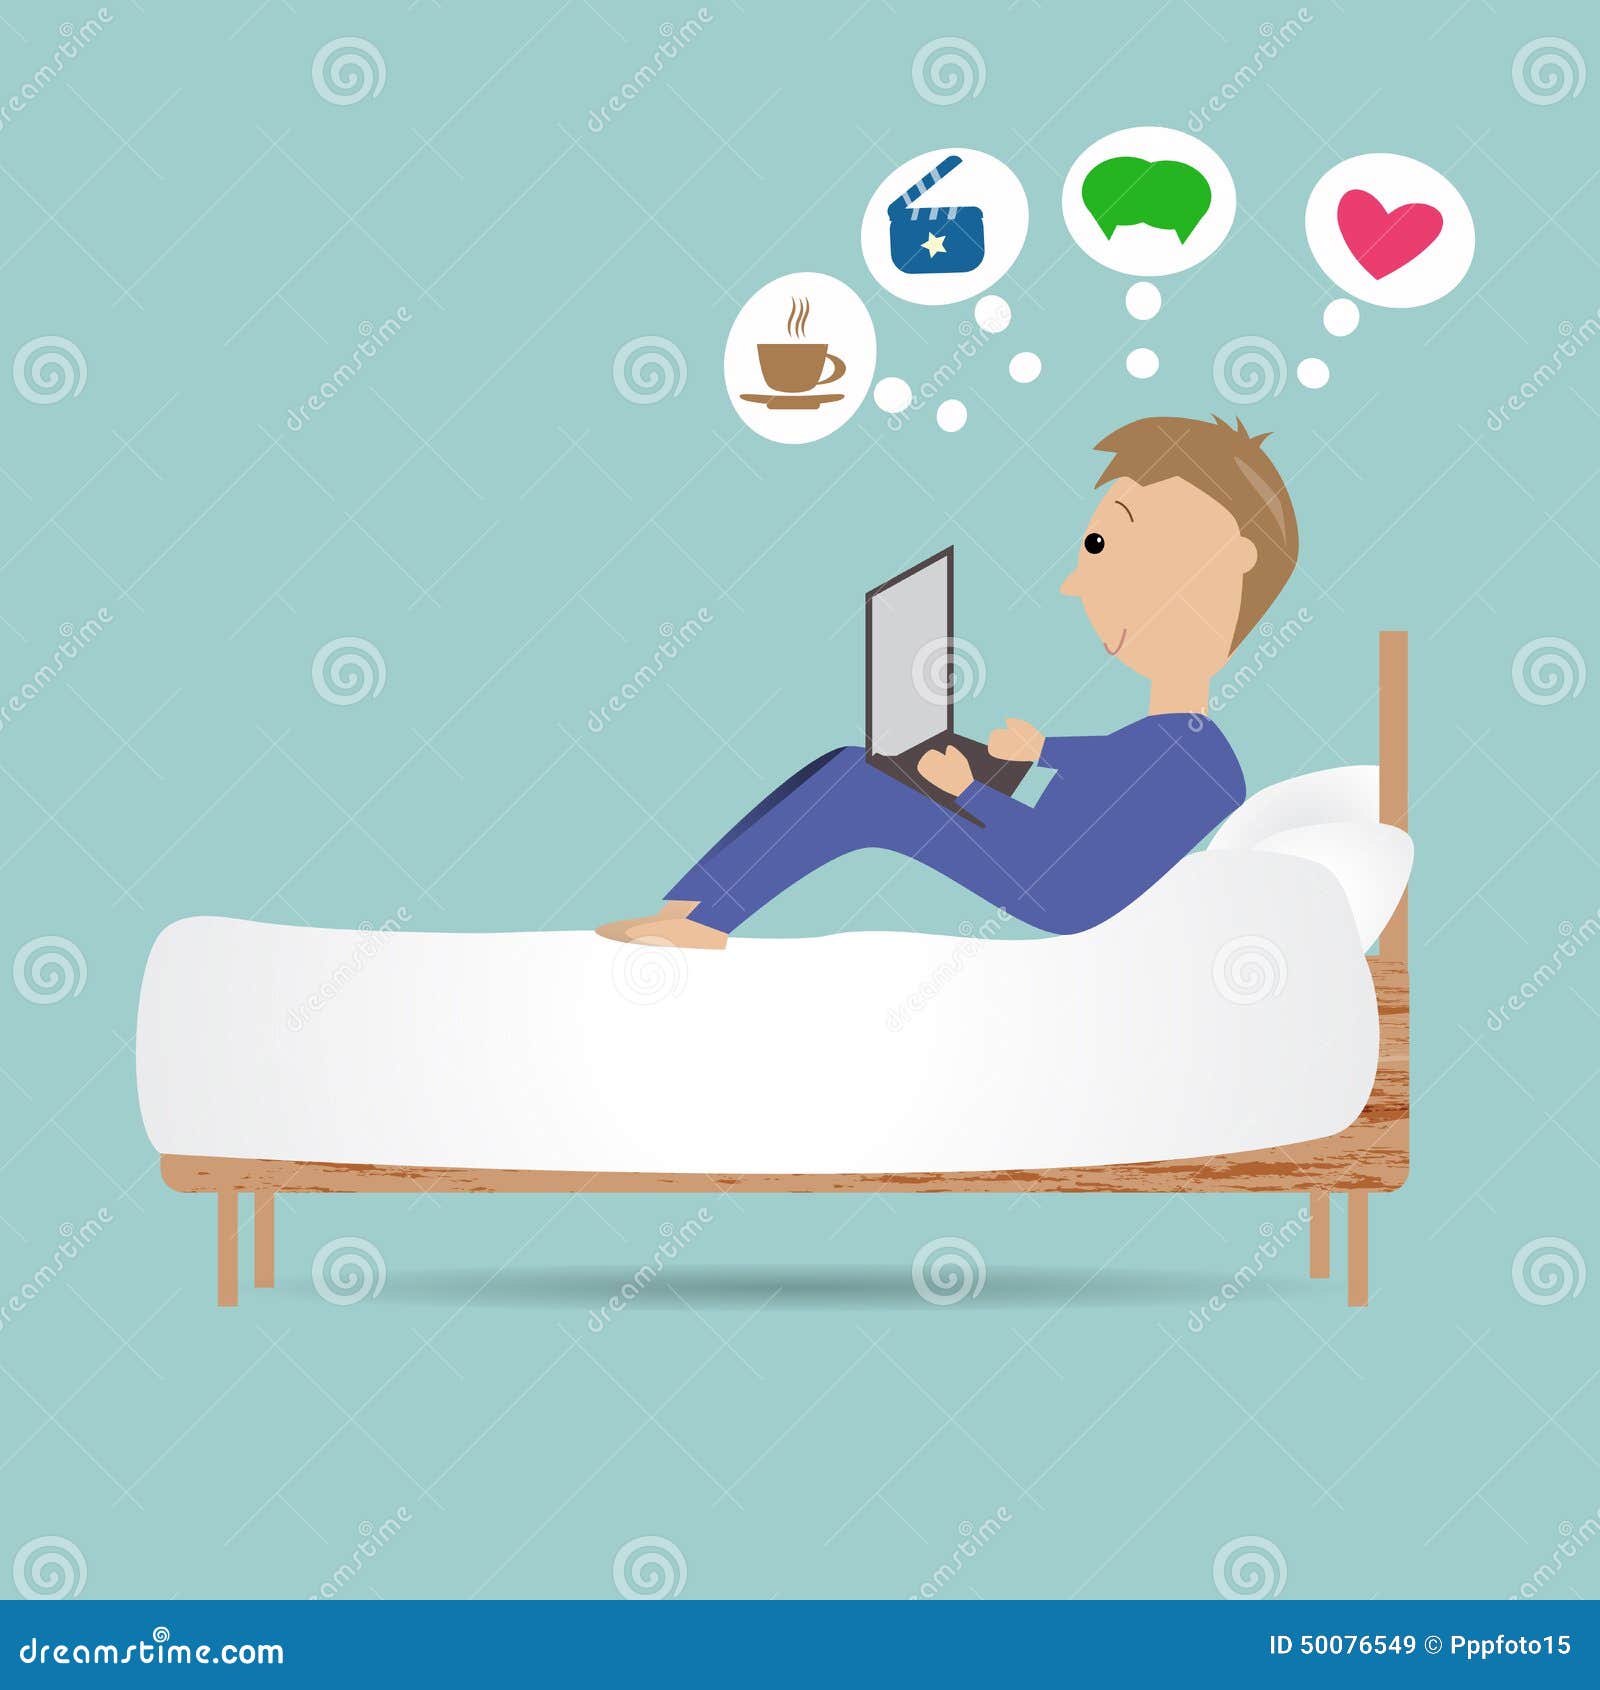 The Man Stay On The Bed Use The Laptop For Surfing The Internet Cartoon Vector Cartoondealer Com 50076549